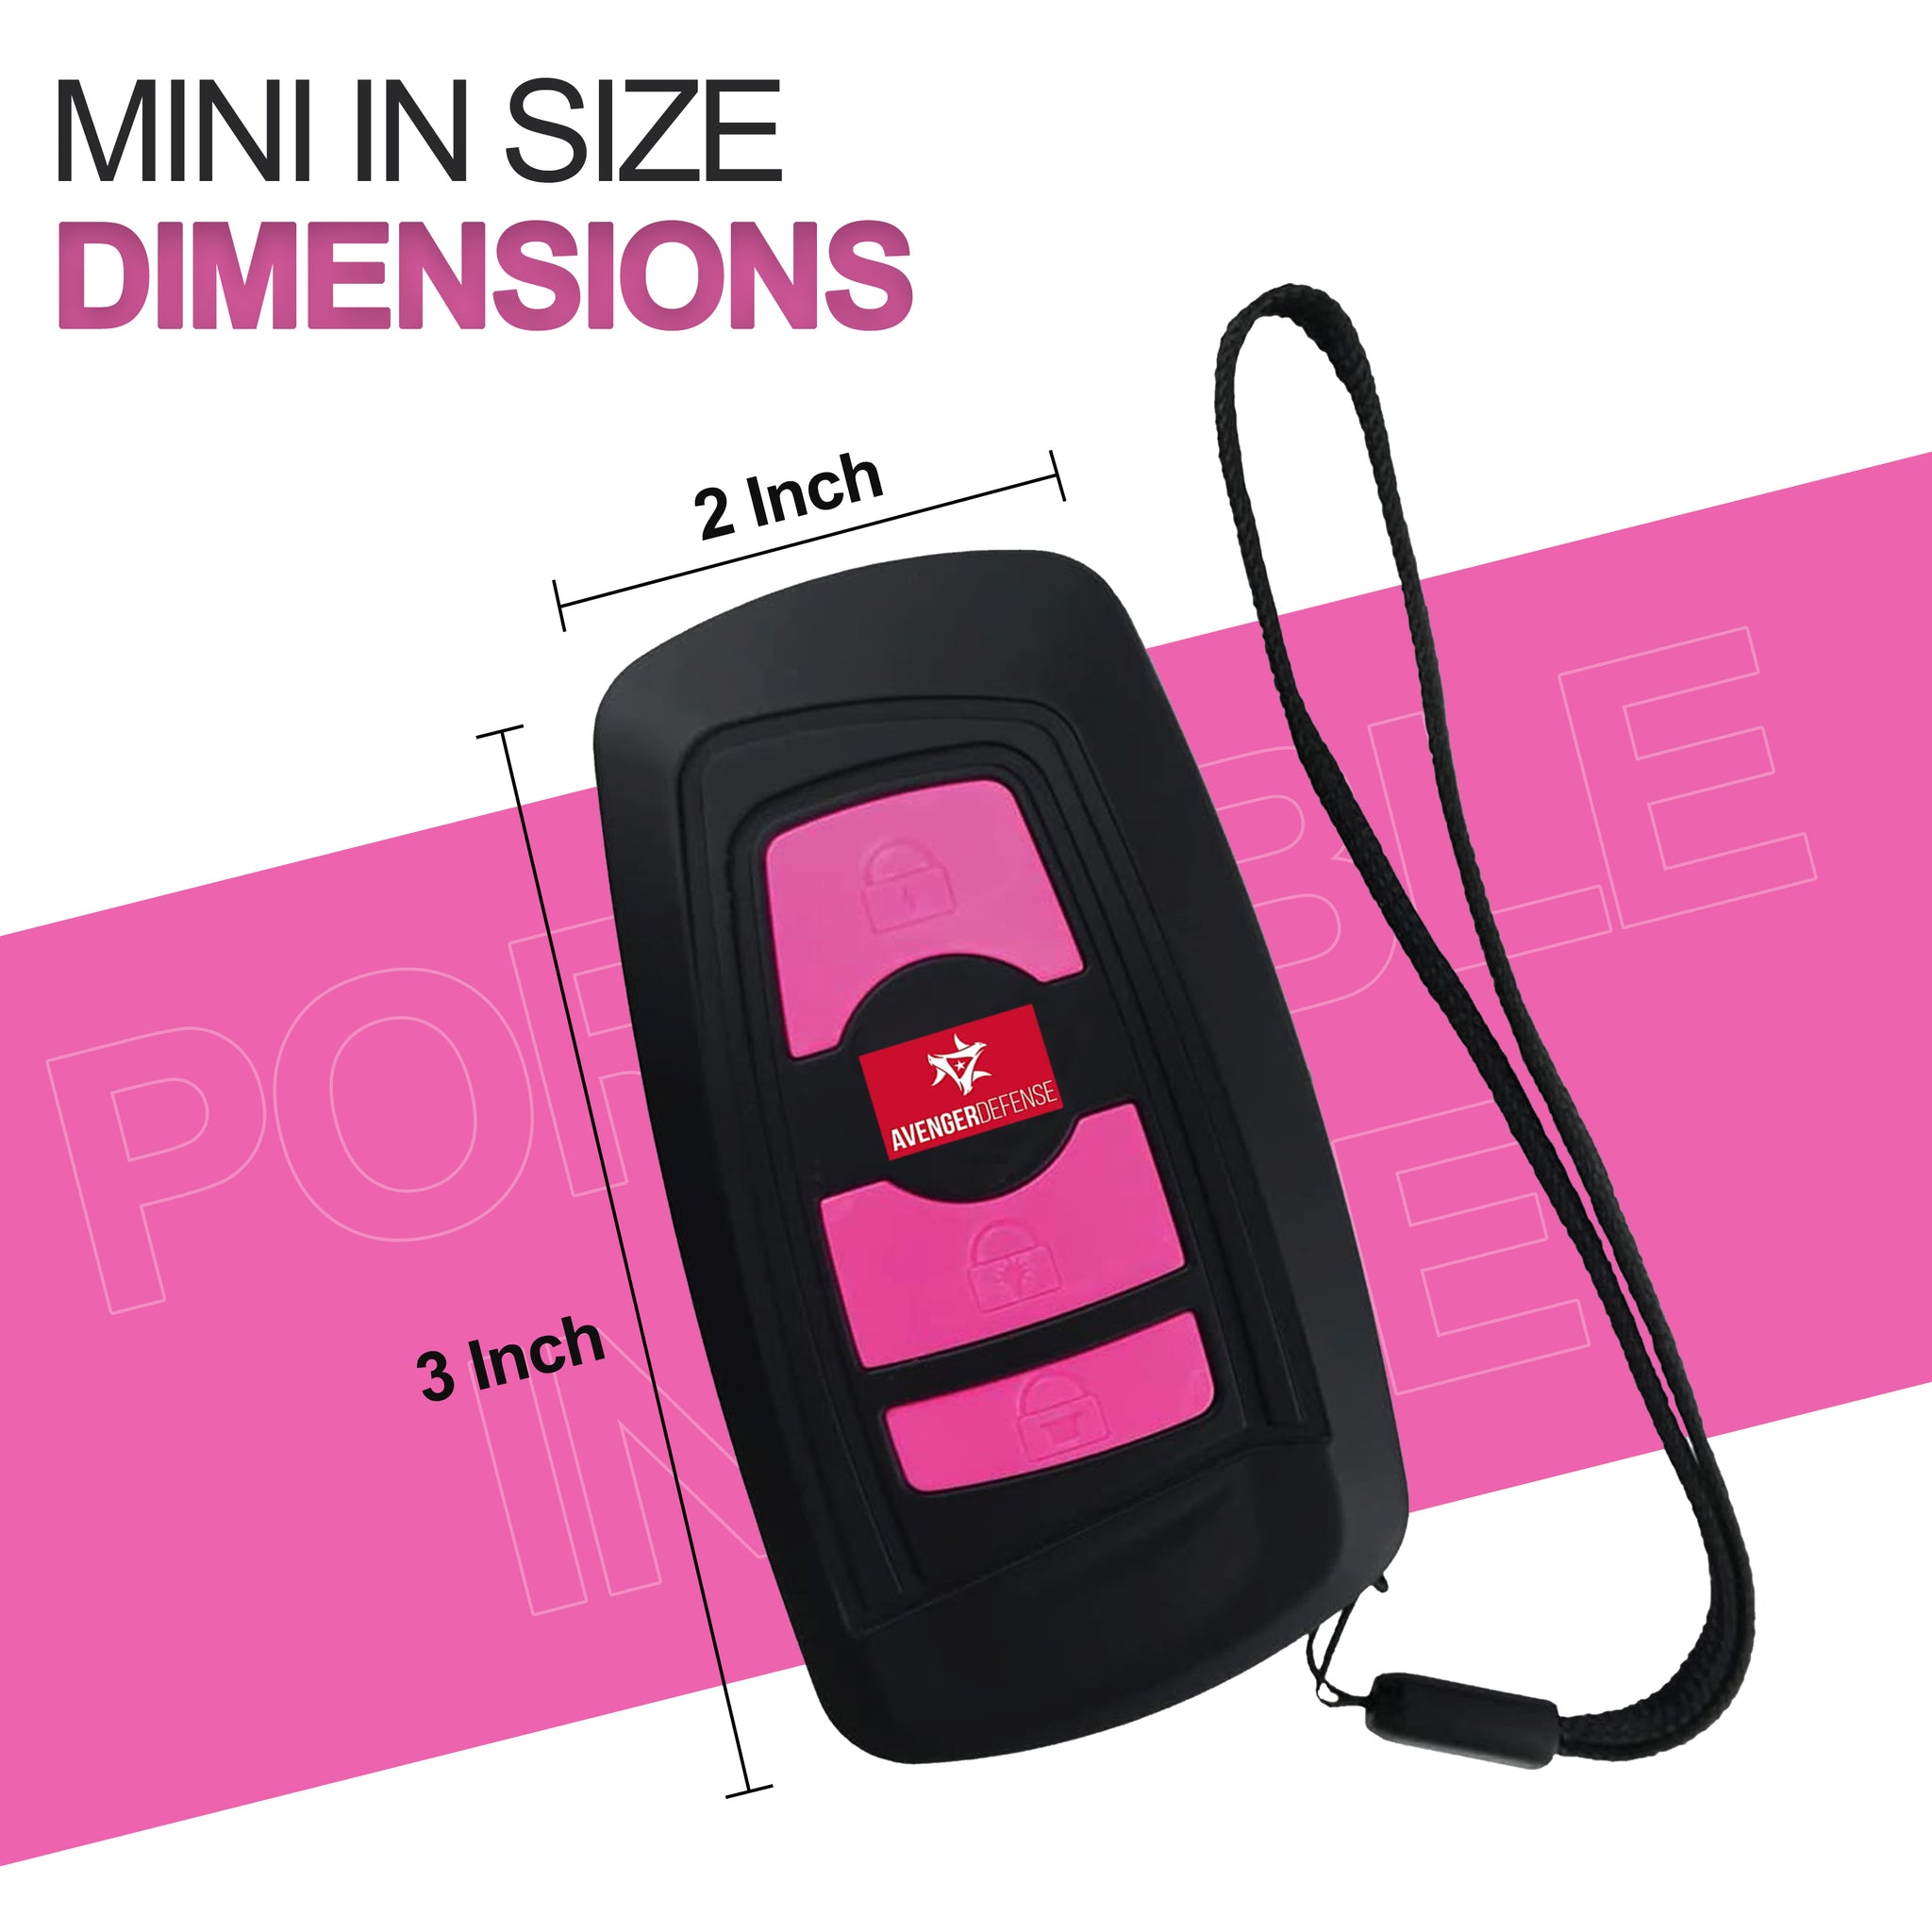 Avenger Defense ADS-70B - Mini Stun Gun Key fob Design with Security Alarm – Rechargeable 1.2 µC Charge Powerful Self Defense – LED Flashlight and Wrist Strap - Black, Pink